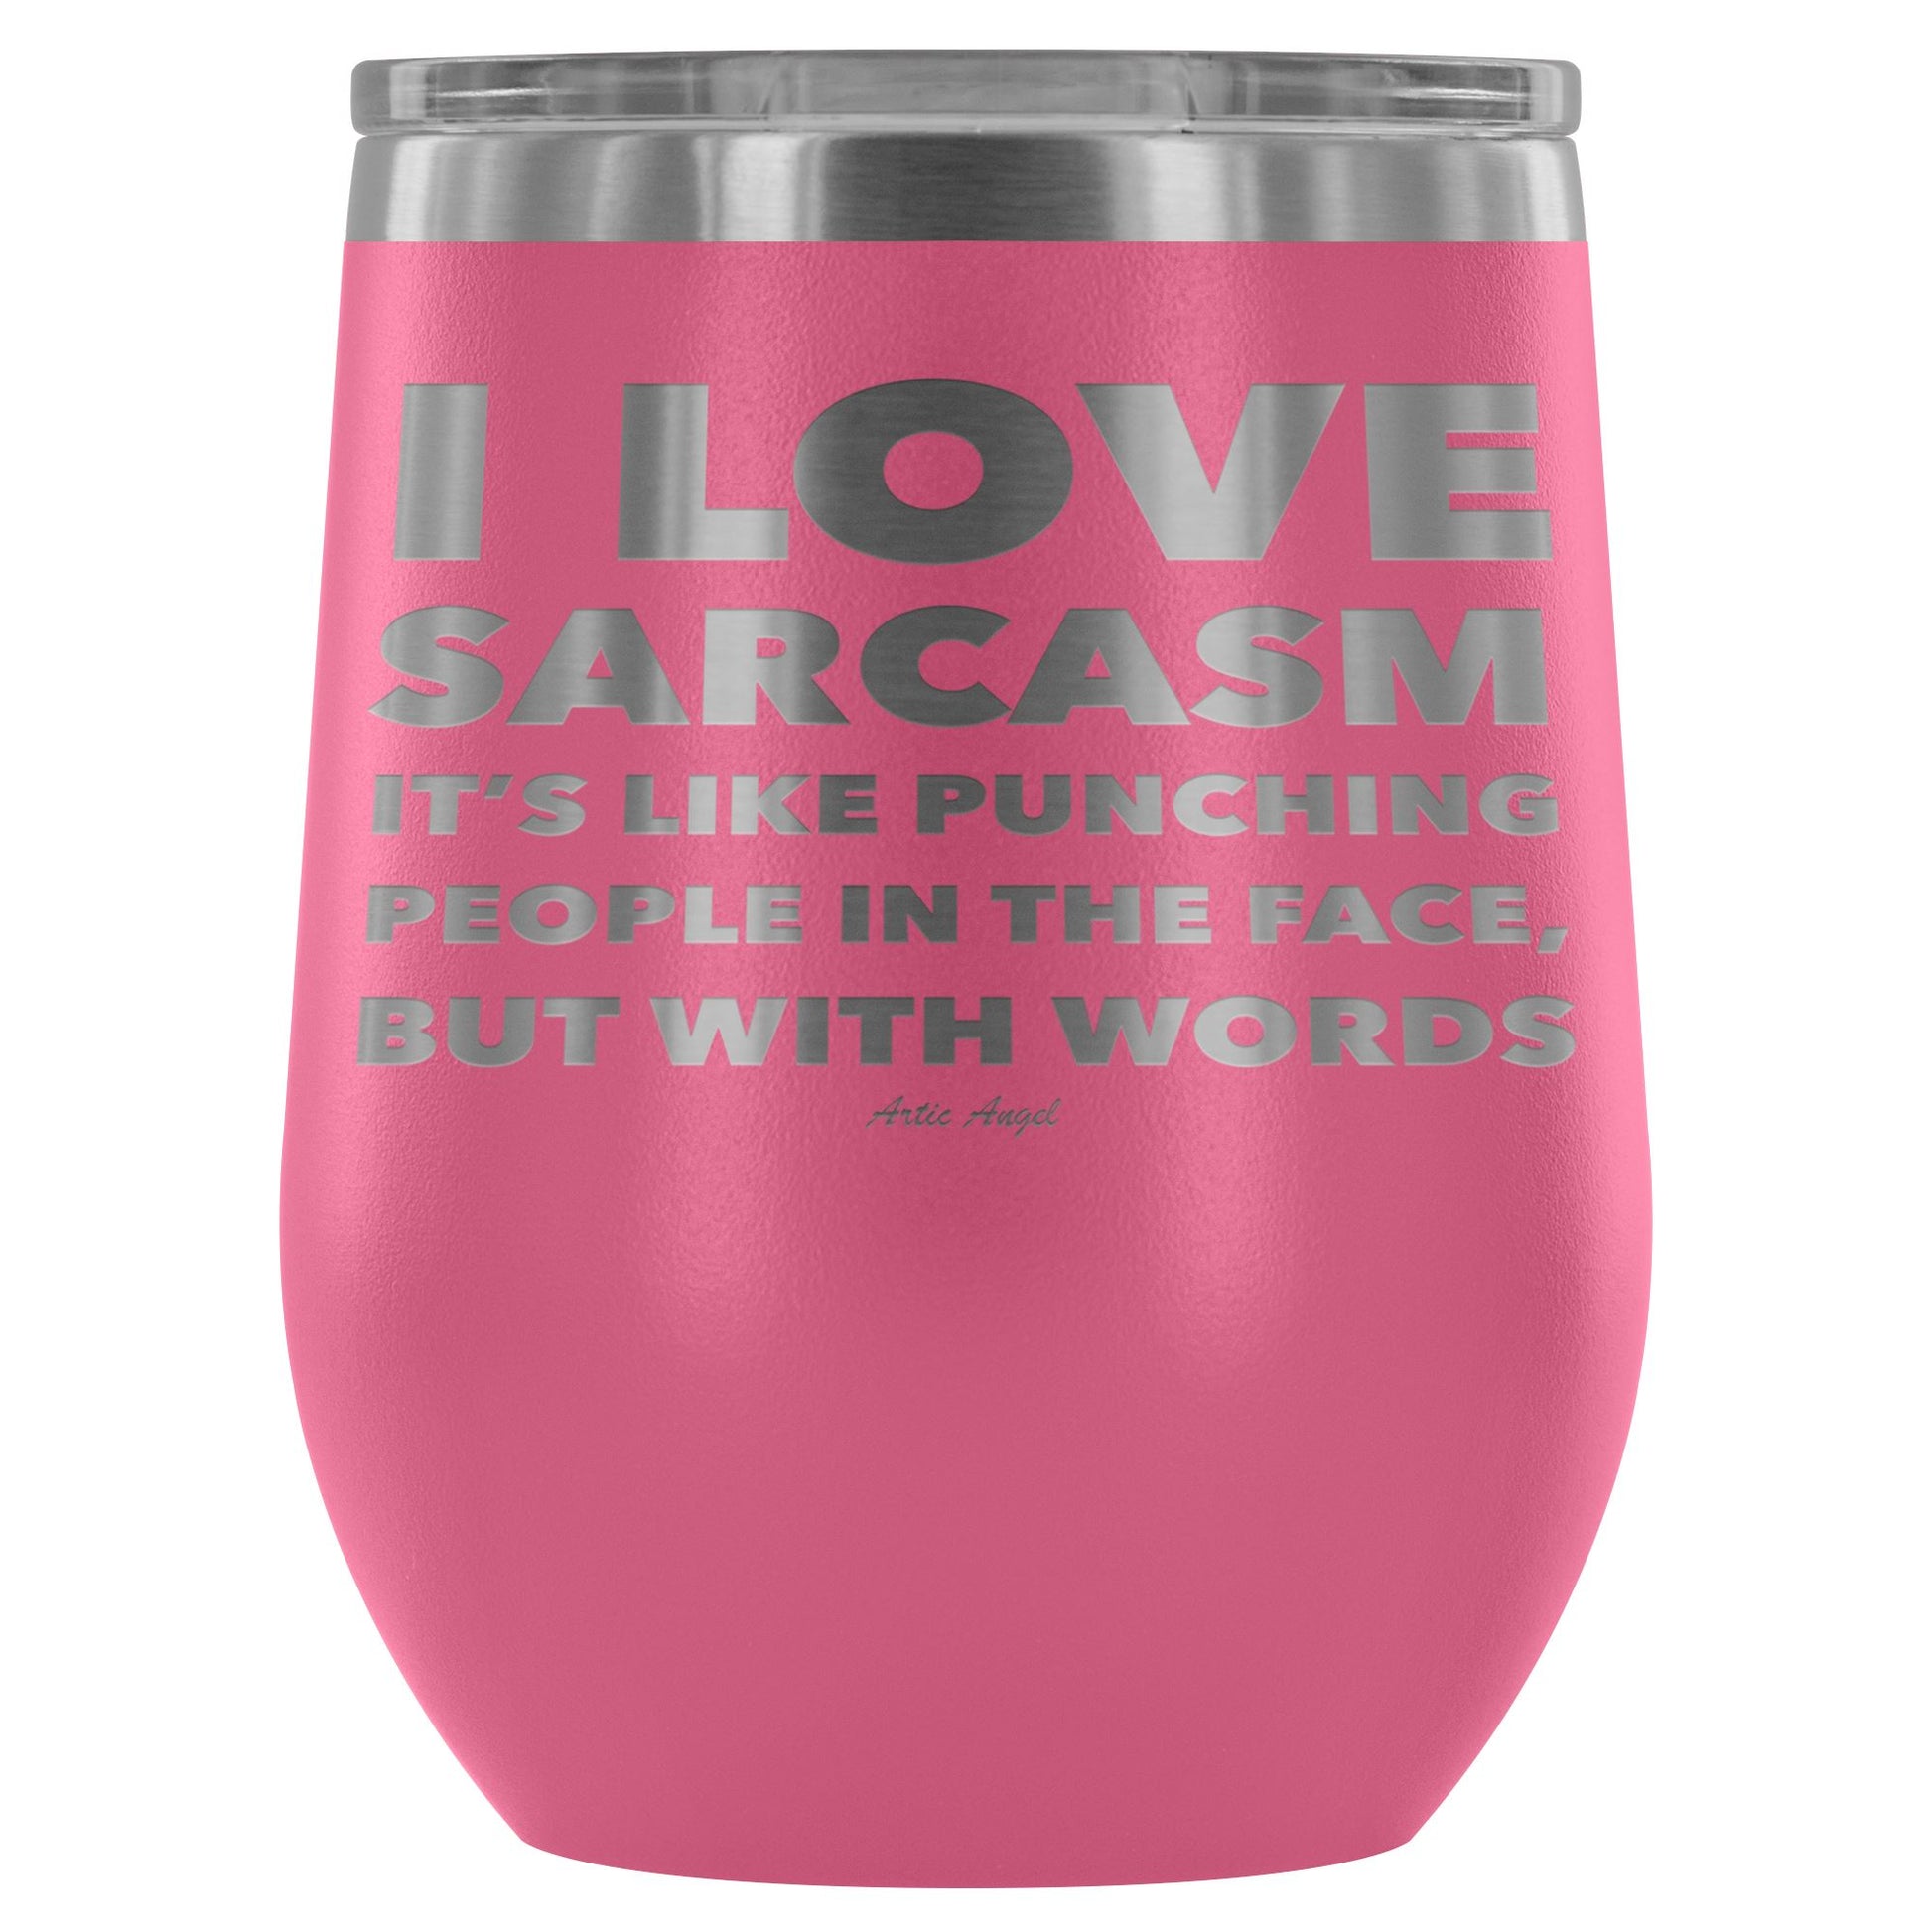 "I Love Sarcasm It's Like Punching People In The Face, But With Words" - Stemless Wine Cup Wine Tumbler Pink 